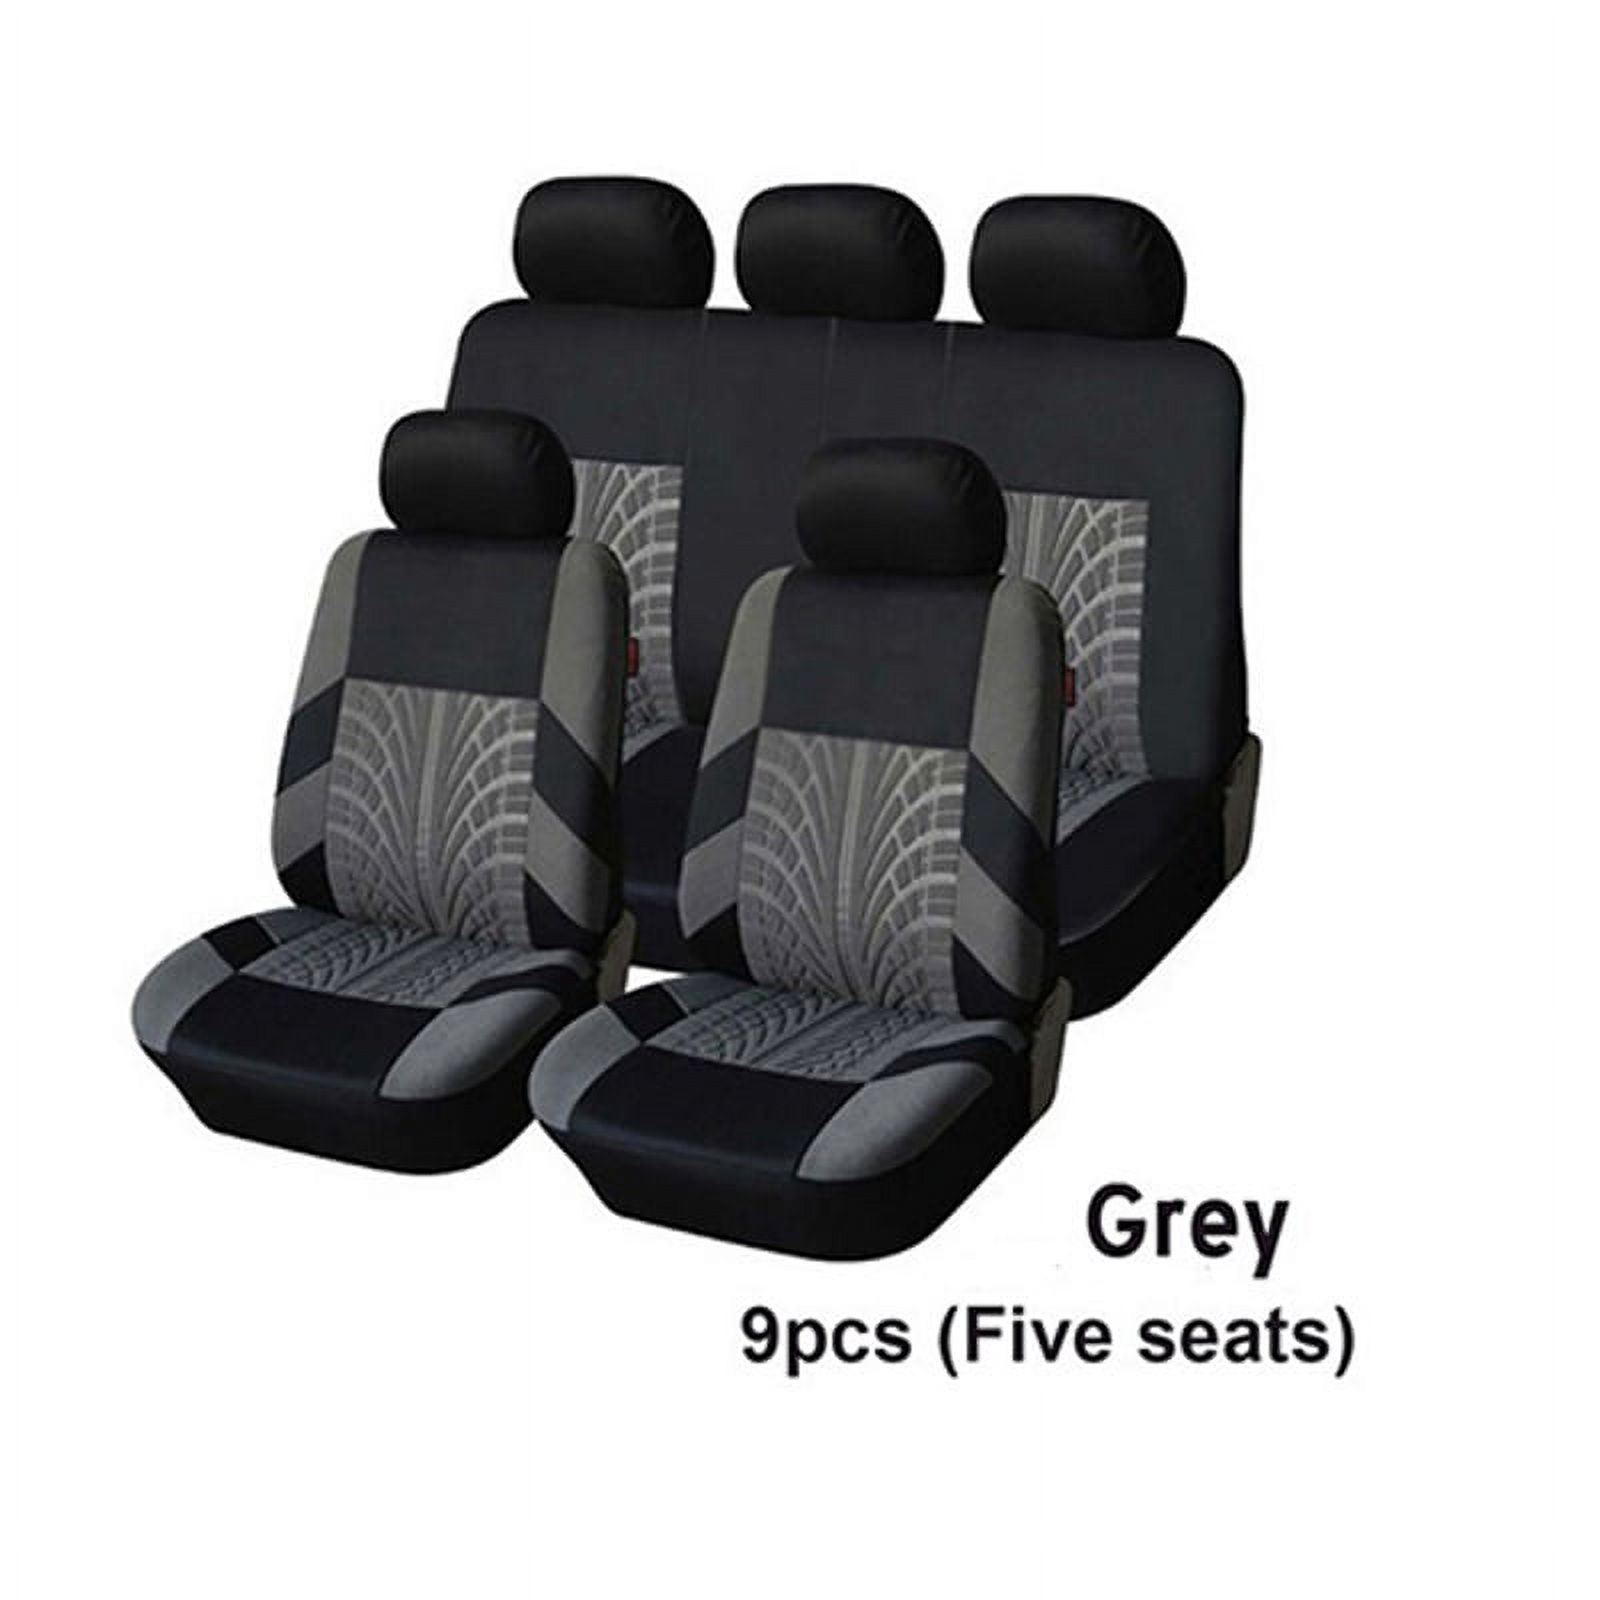 New 9PCS Universal Seat Covers for Car Full Car Seat Cover Car Cushion Case Cover Front Car Seat Cover Car Accessories Car Seats - image 2 of 8